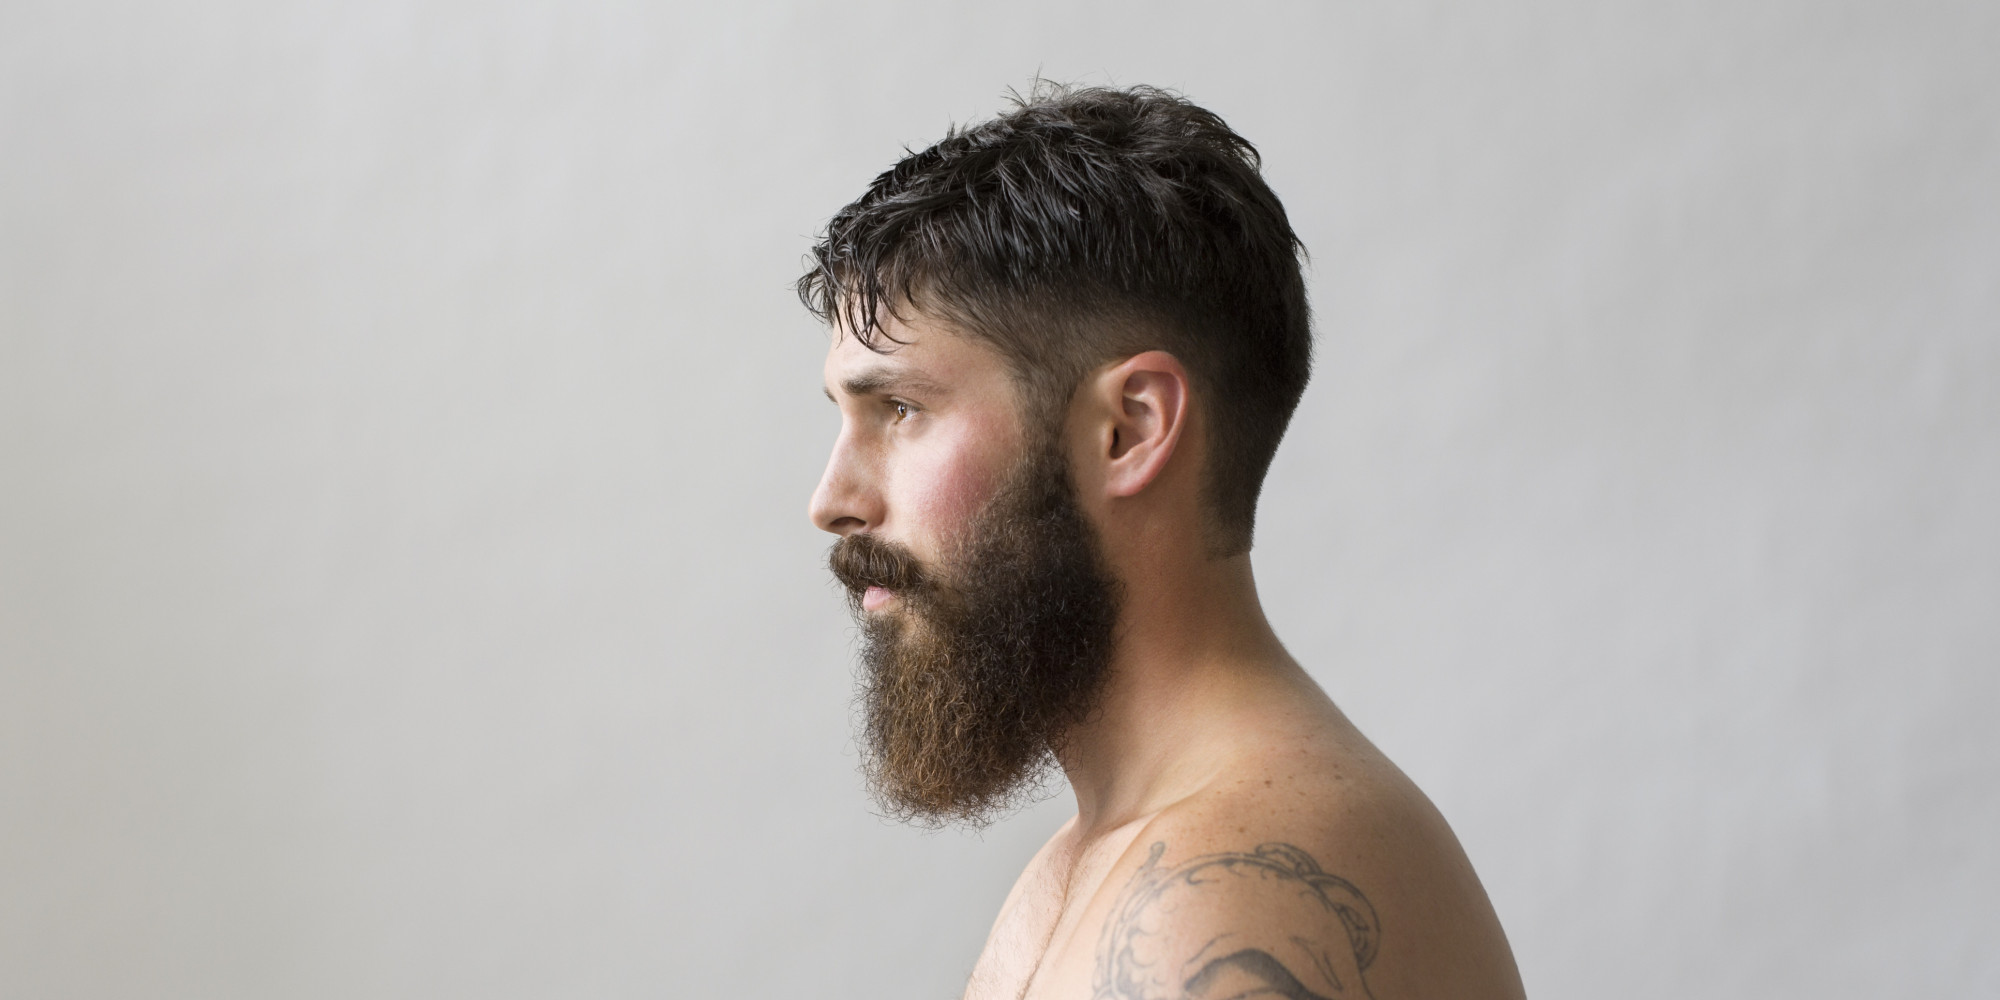 Bearded Side View | Beard Pictures | Pictures of Beards | Beard Images